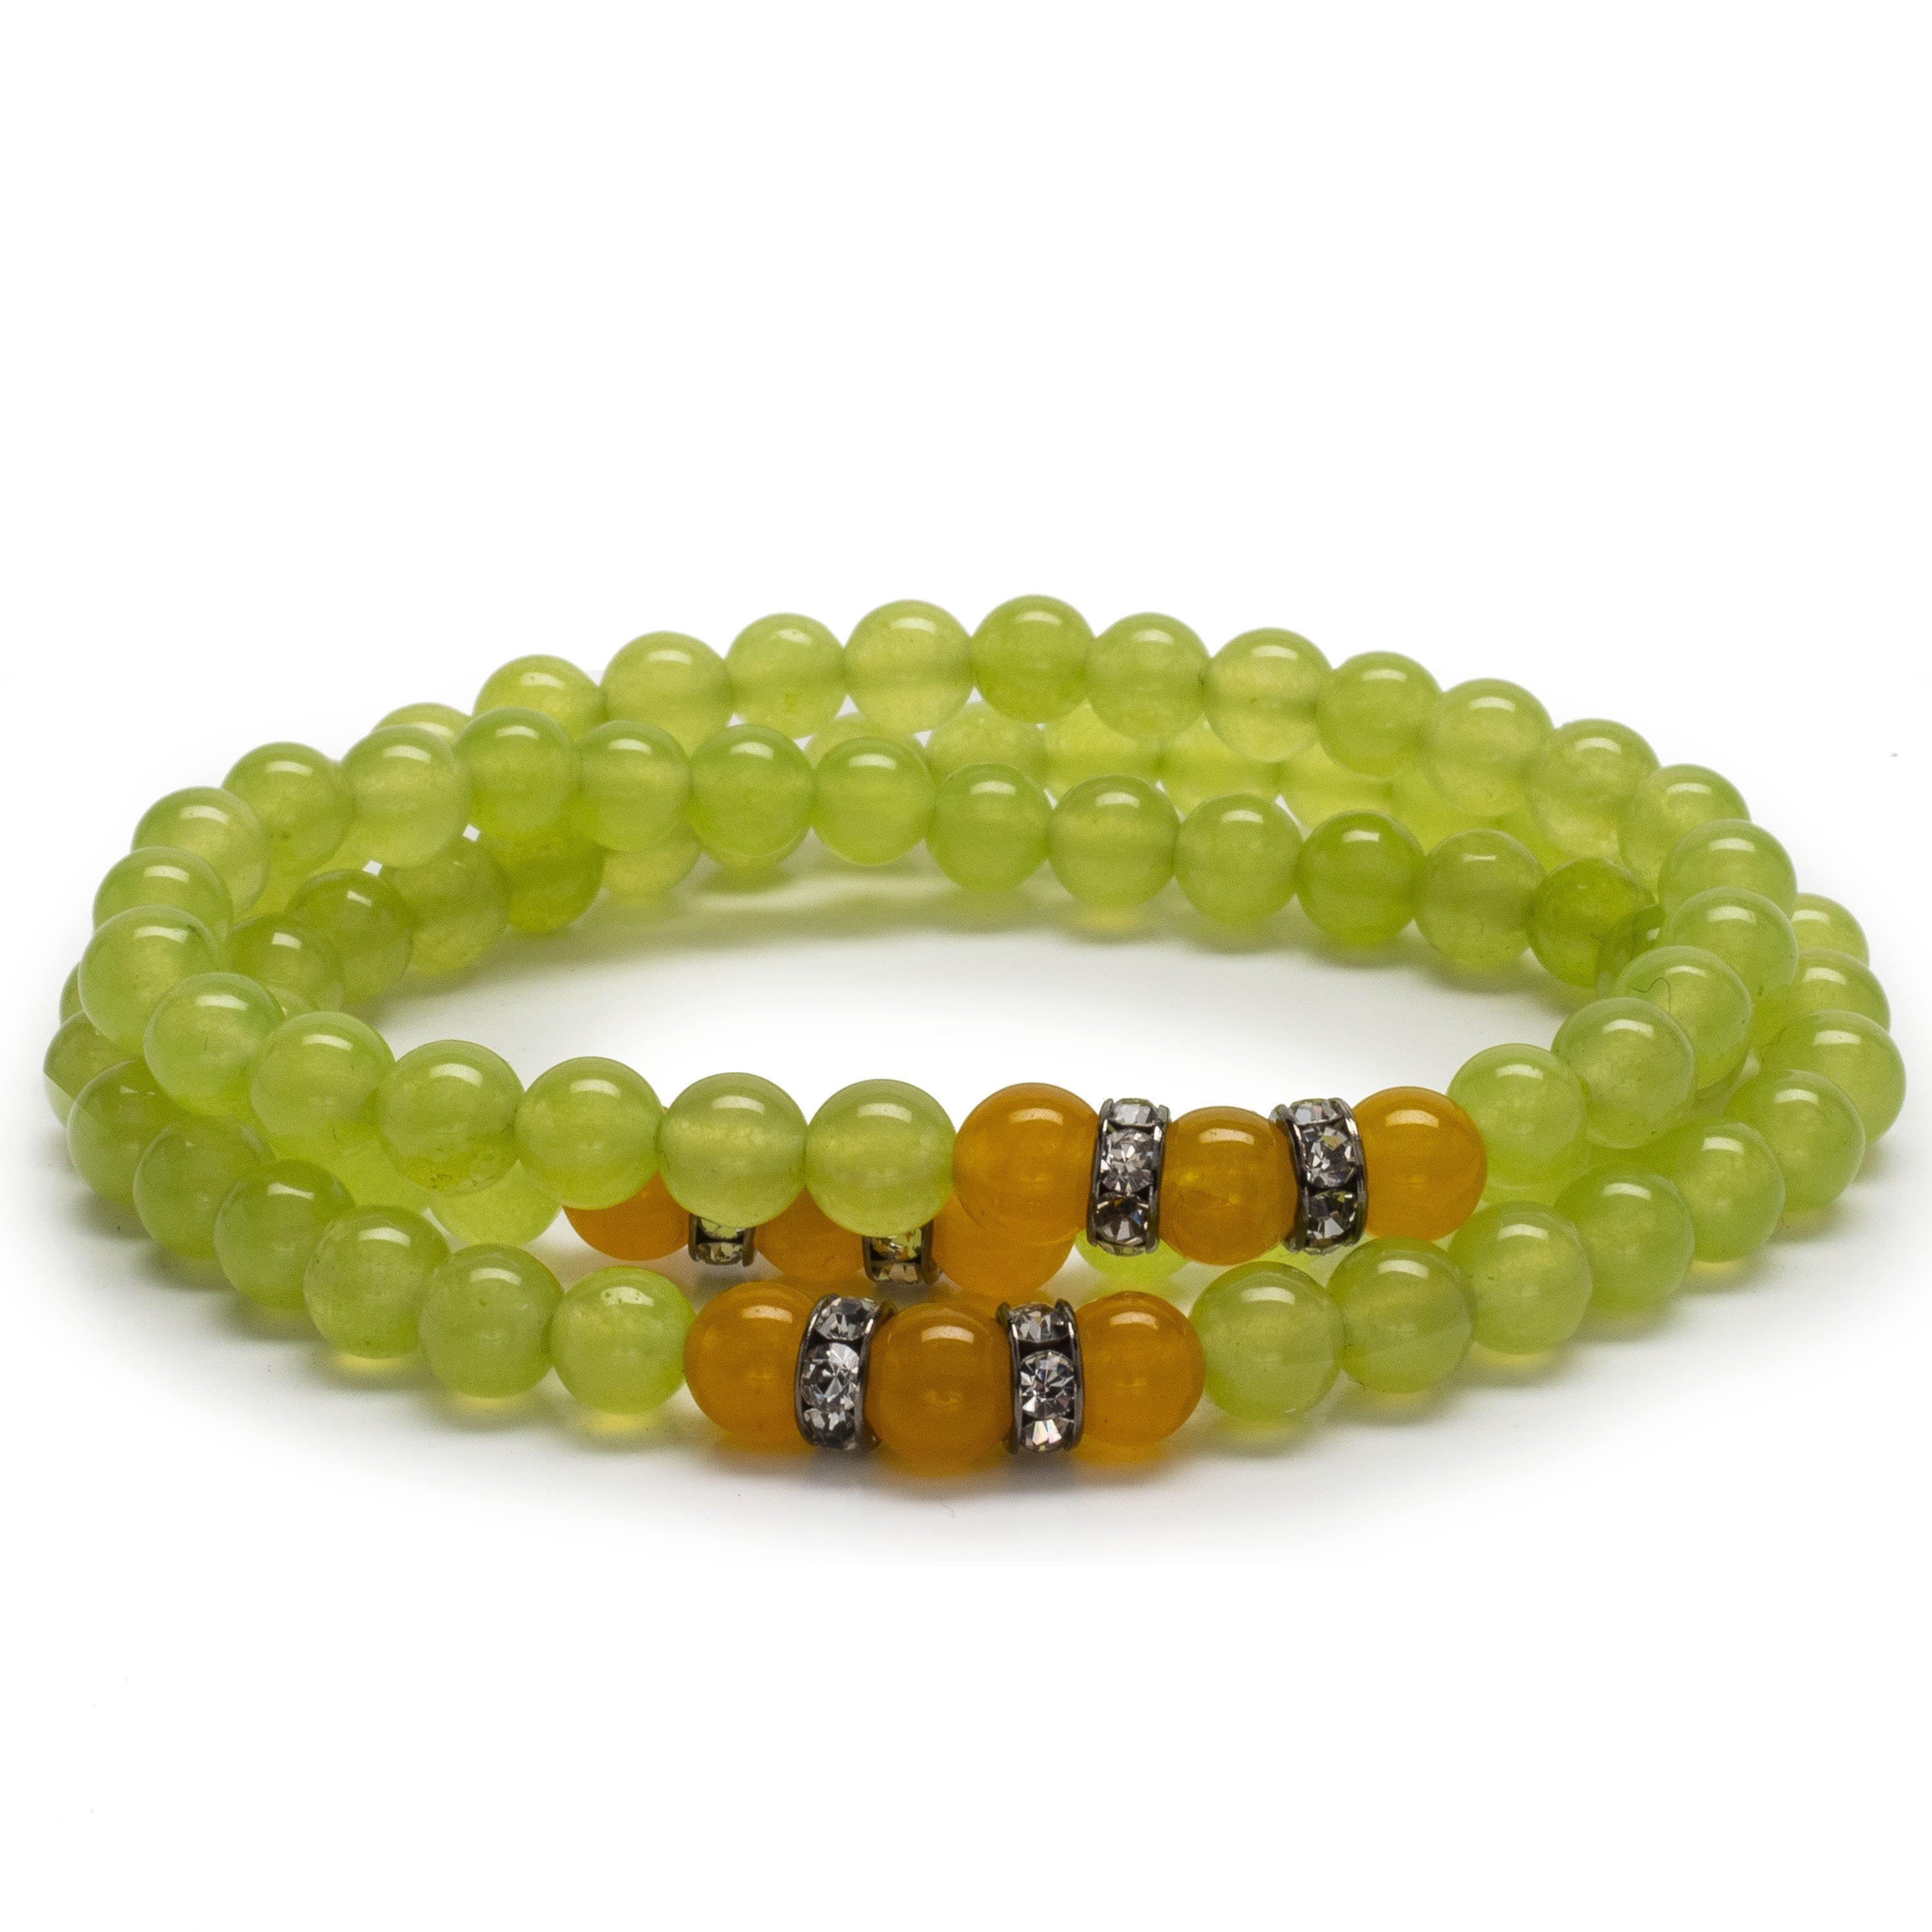 Kalifano Gemstone Bracelets Lime Green Agate 6mm Beads with Yellow Agate and Crystal Accent Beads Triple Wrap Elastic Gemstone Bracelet WHITE-BGI3-044